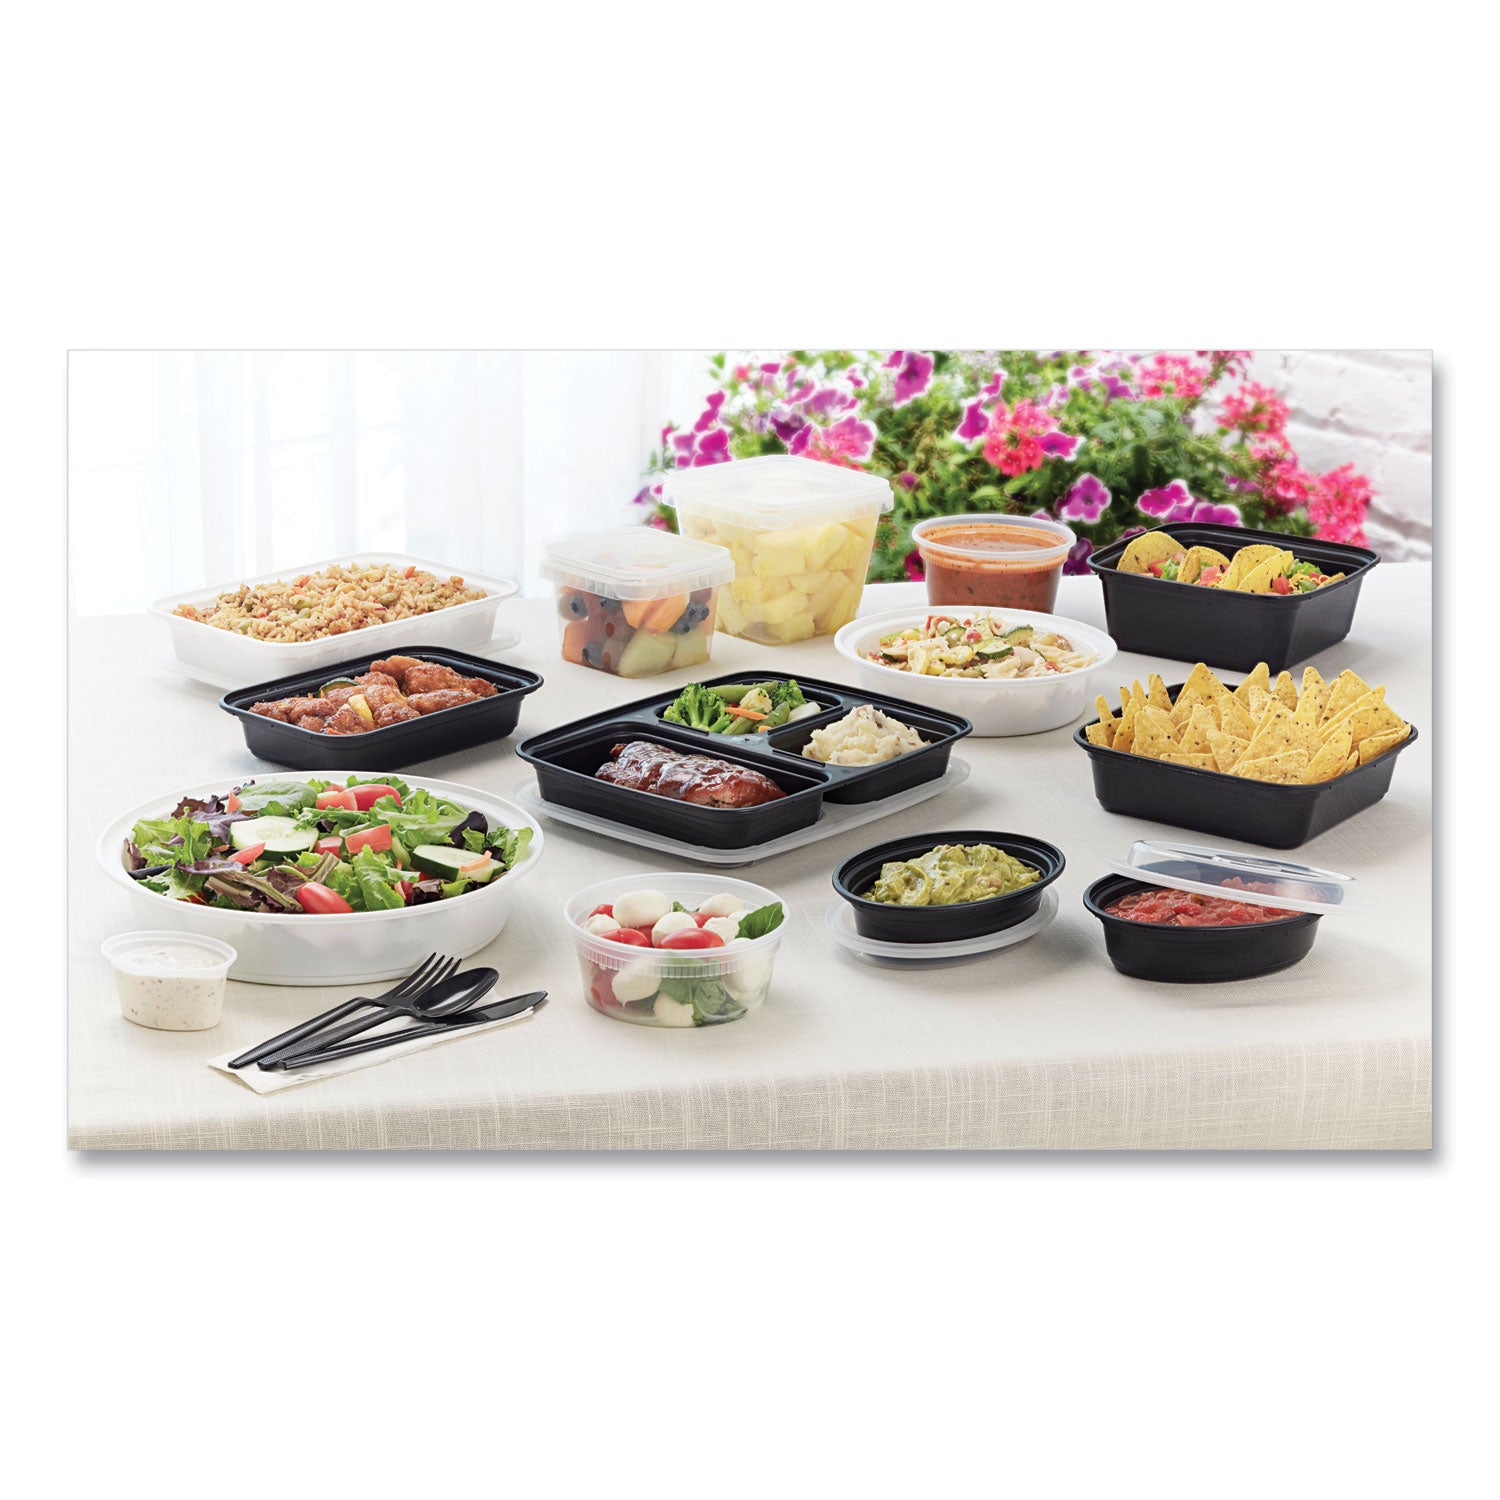 newspring-versatainer-microwavable-containers-oval-12-oz-68-x-48-x-145-black-clear-plastic-150-carton_pctoc12b - 4